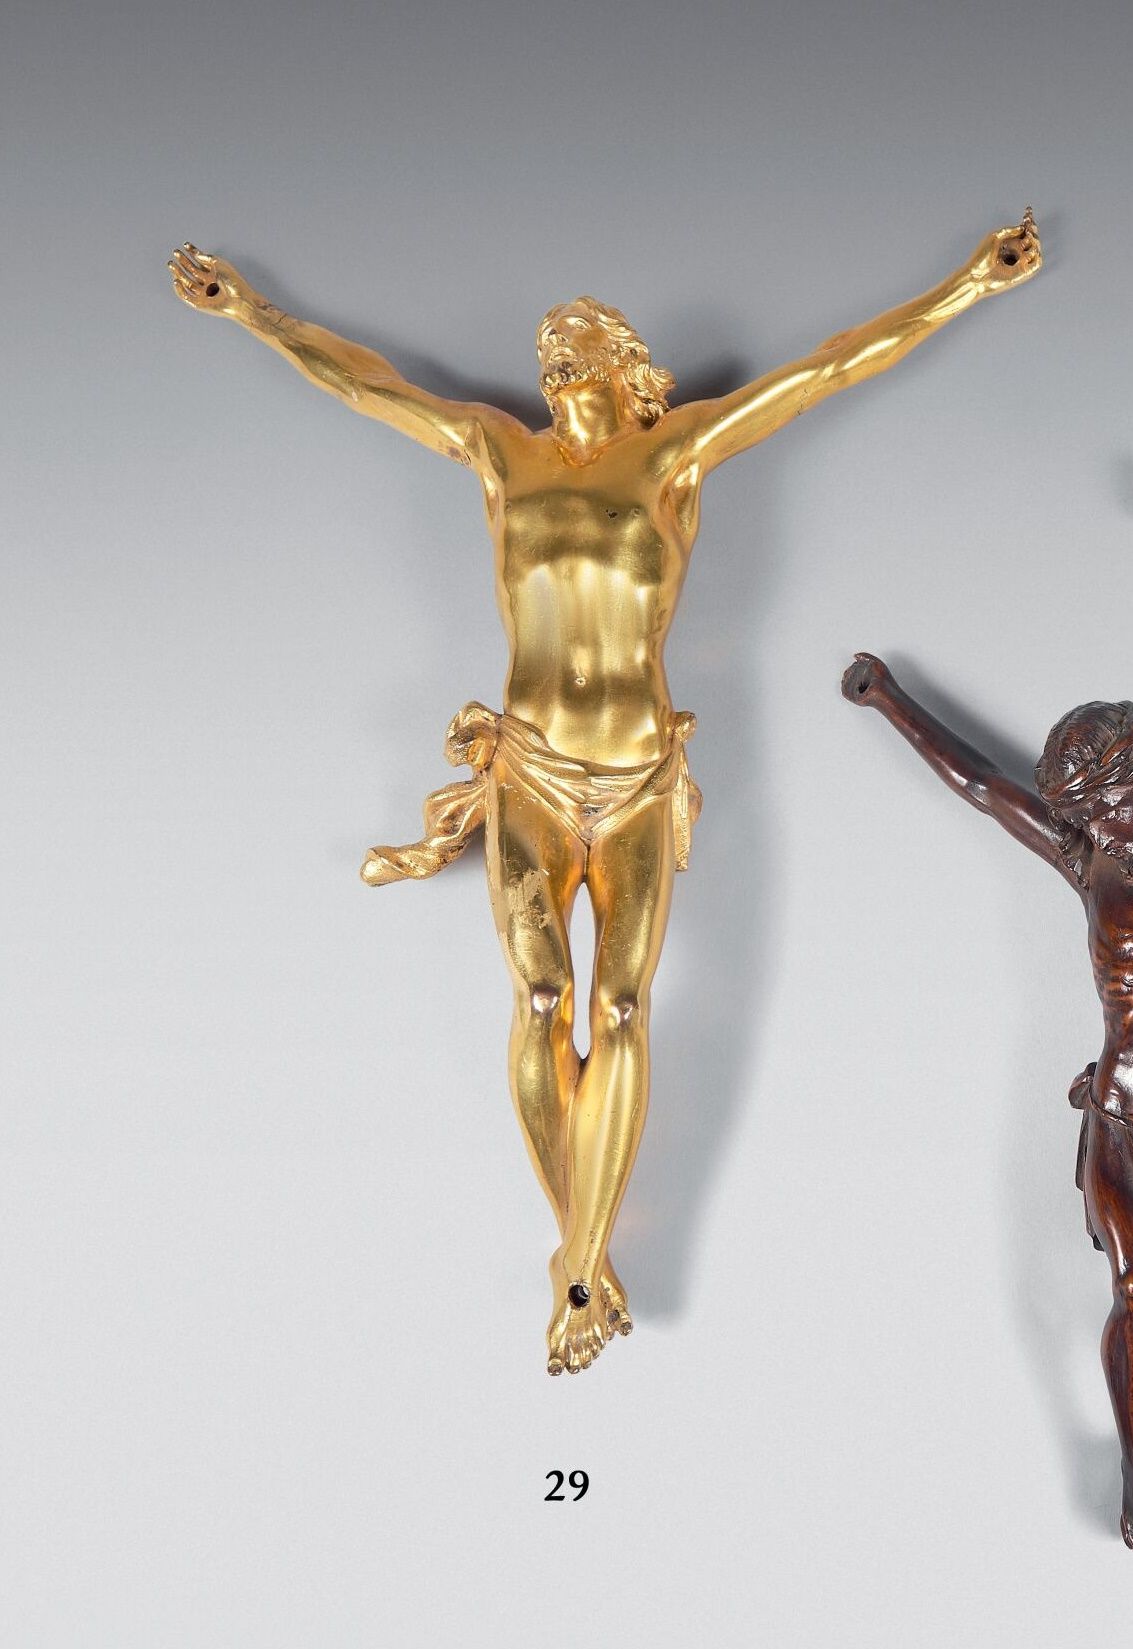 Null Christ in gilded bronze with chased perizonium.
Height: 25 cm